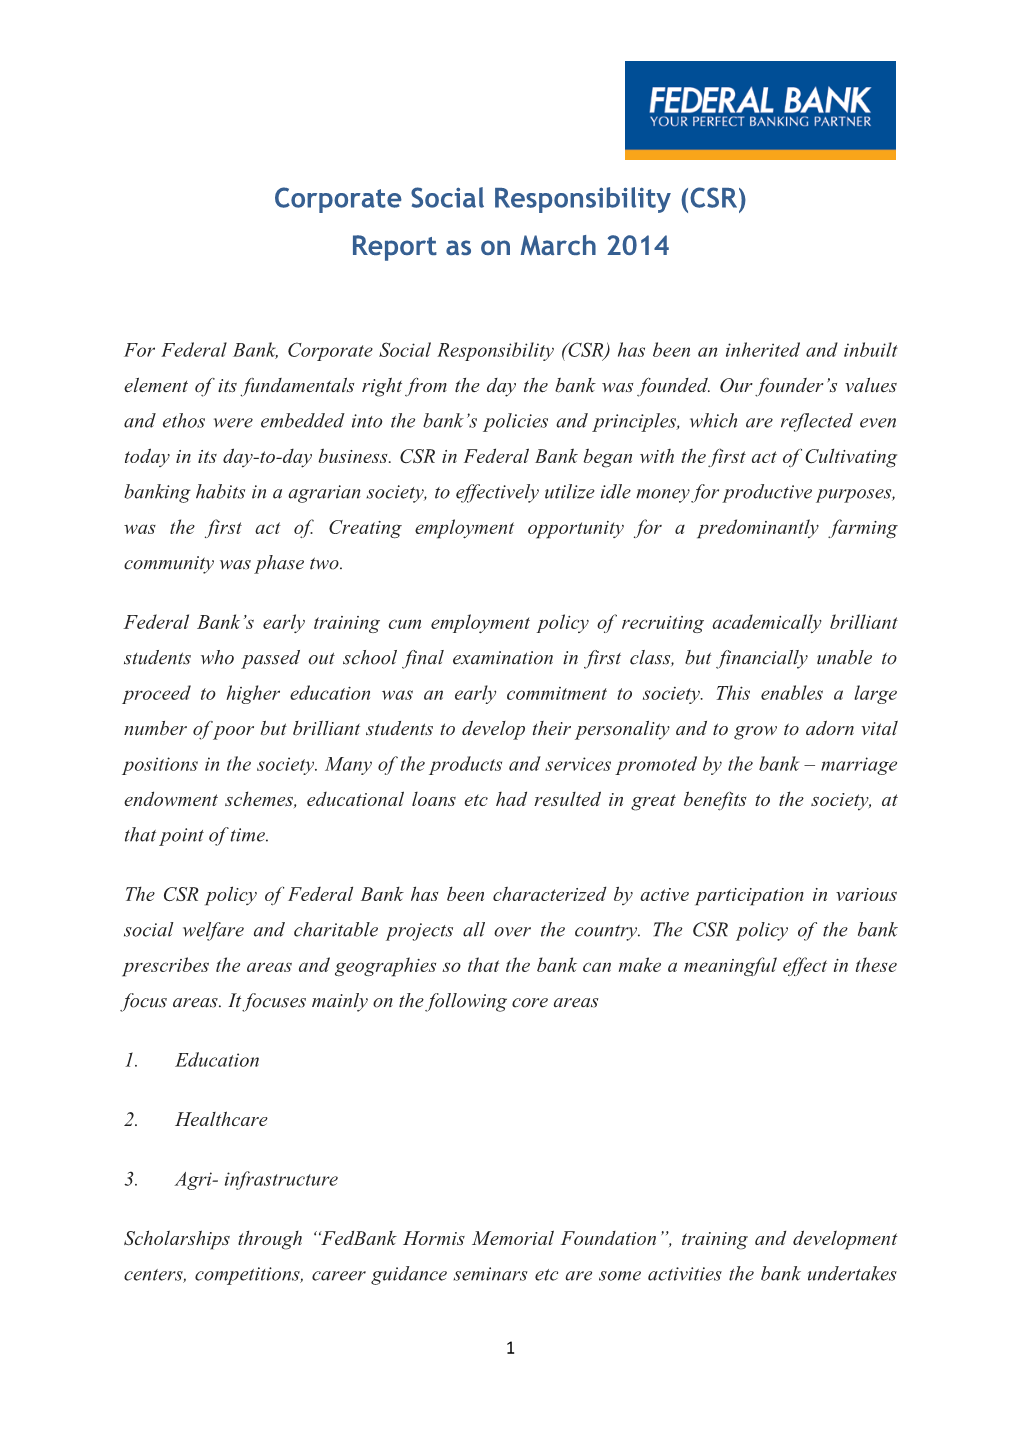 Corporate Social Responsibility (CSR) Report As on March 2014